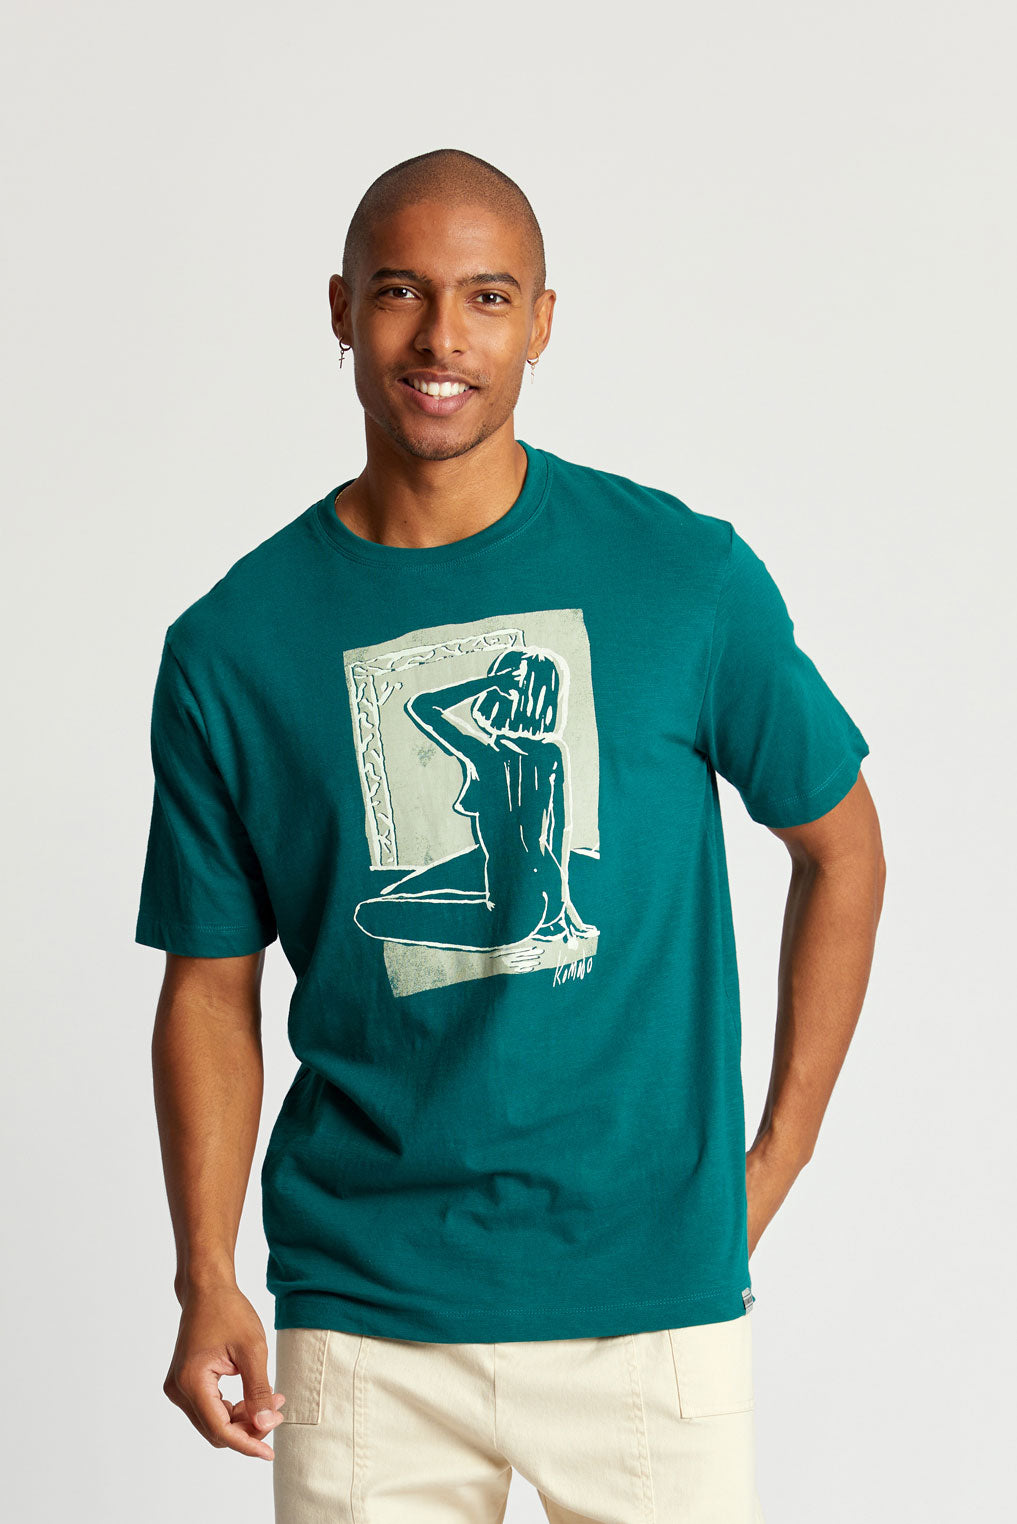 CHEEKY Tee GOTS Organic Cotton - Teal Green, EXTRA LARGE